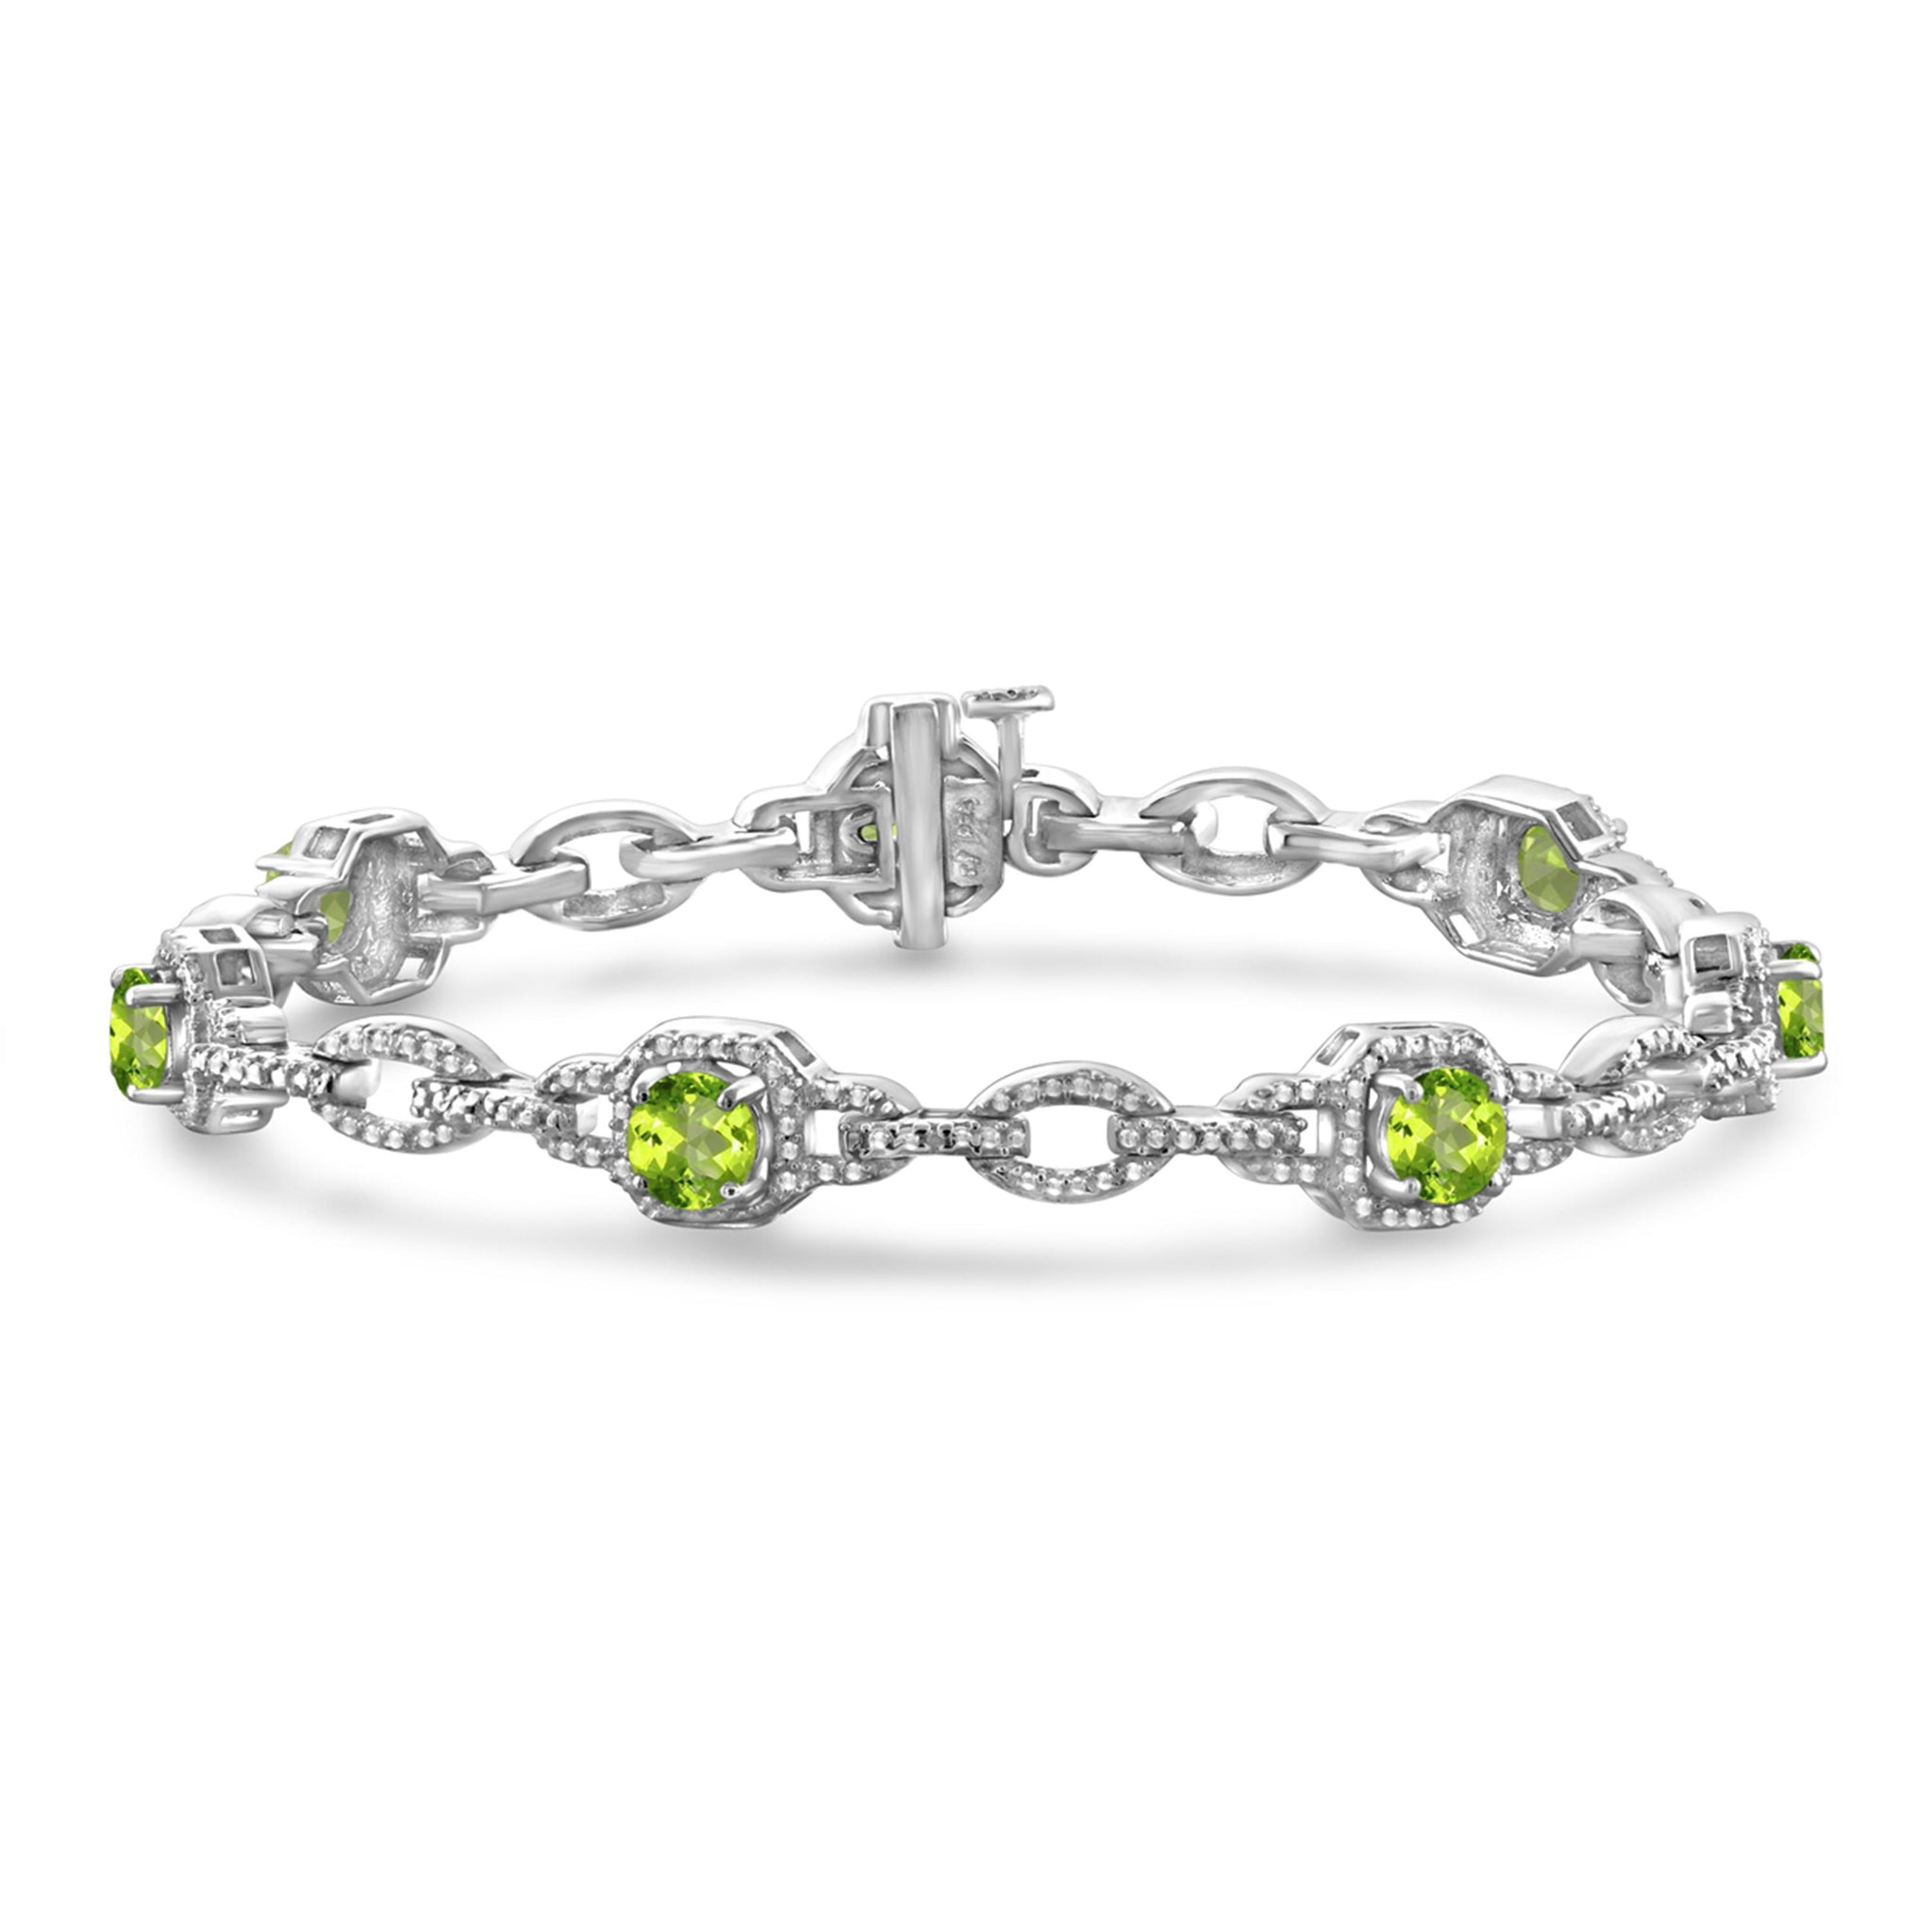 JewelonFire 3.00 Carat T.G.W. Peridot And White Diamond Accent Sterling Silver Bracelet - Assorted Colors